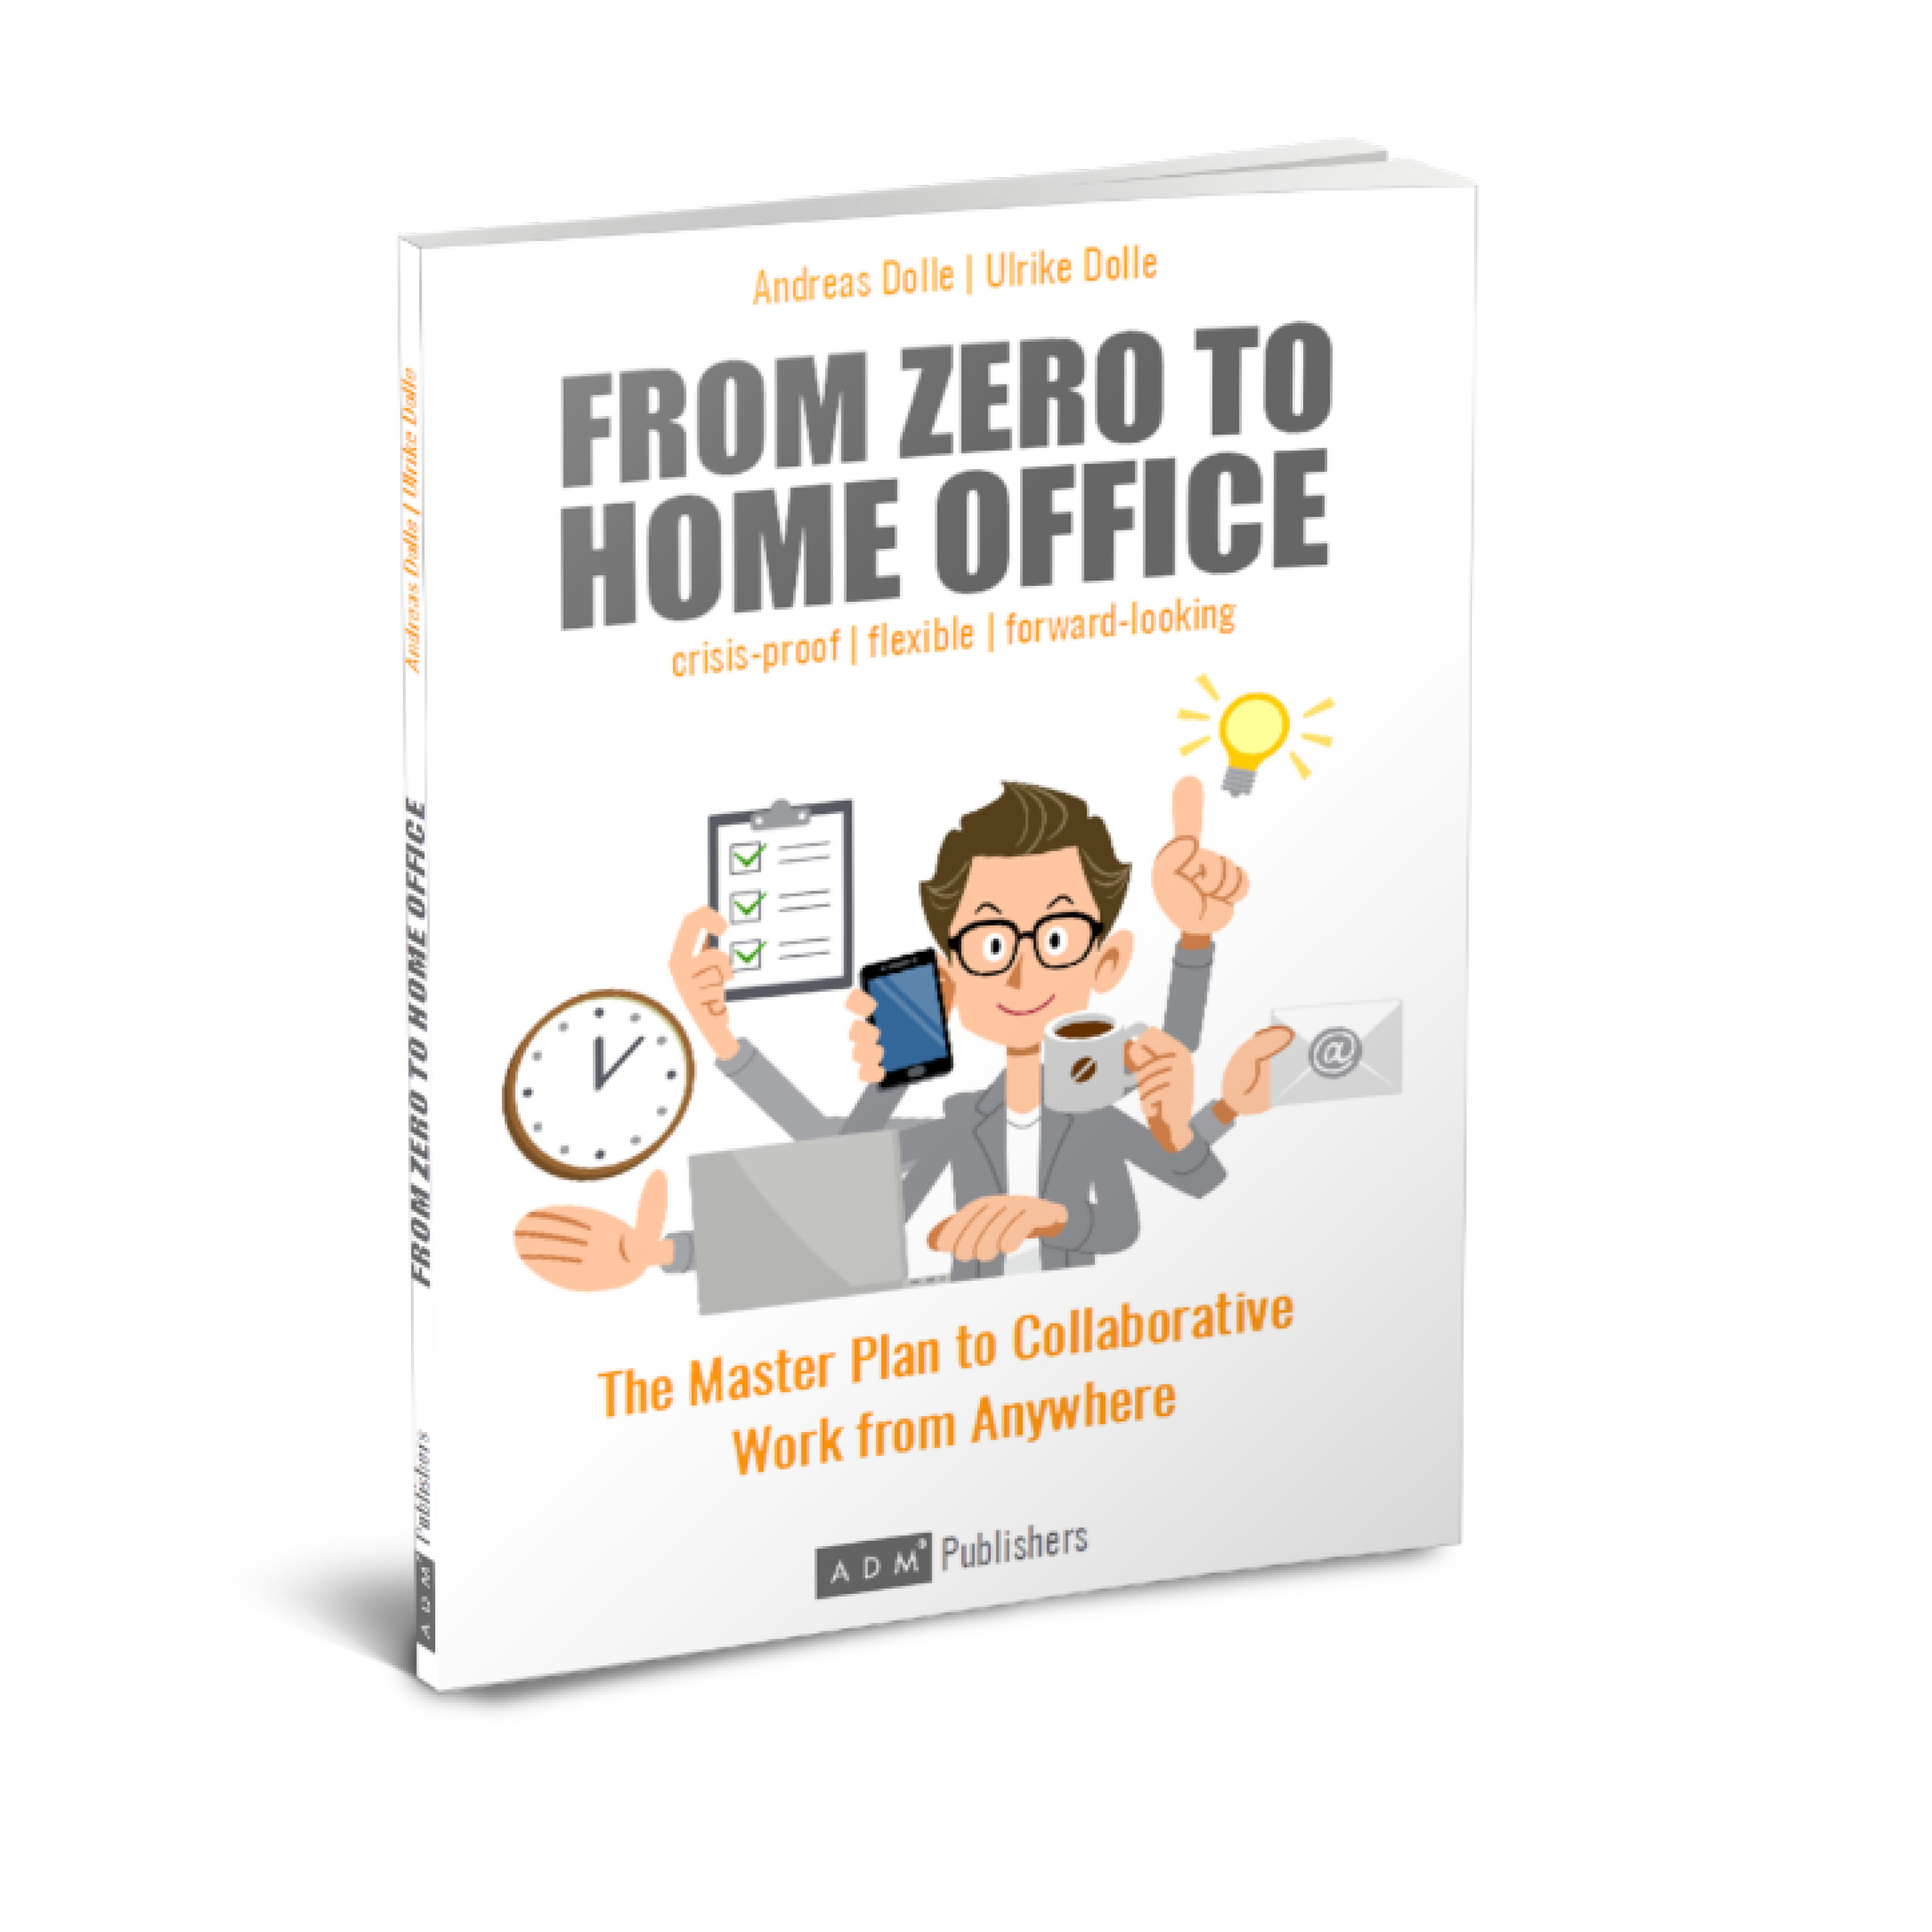 From Zero to Home Office: The Master Plan to collaborative Work from Anywhere